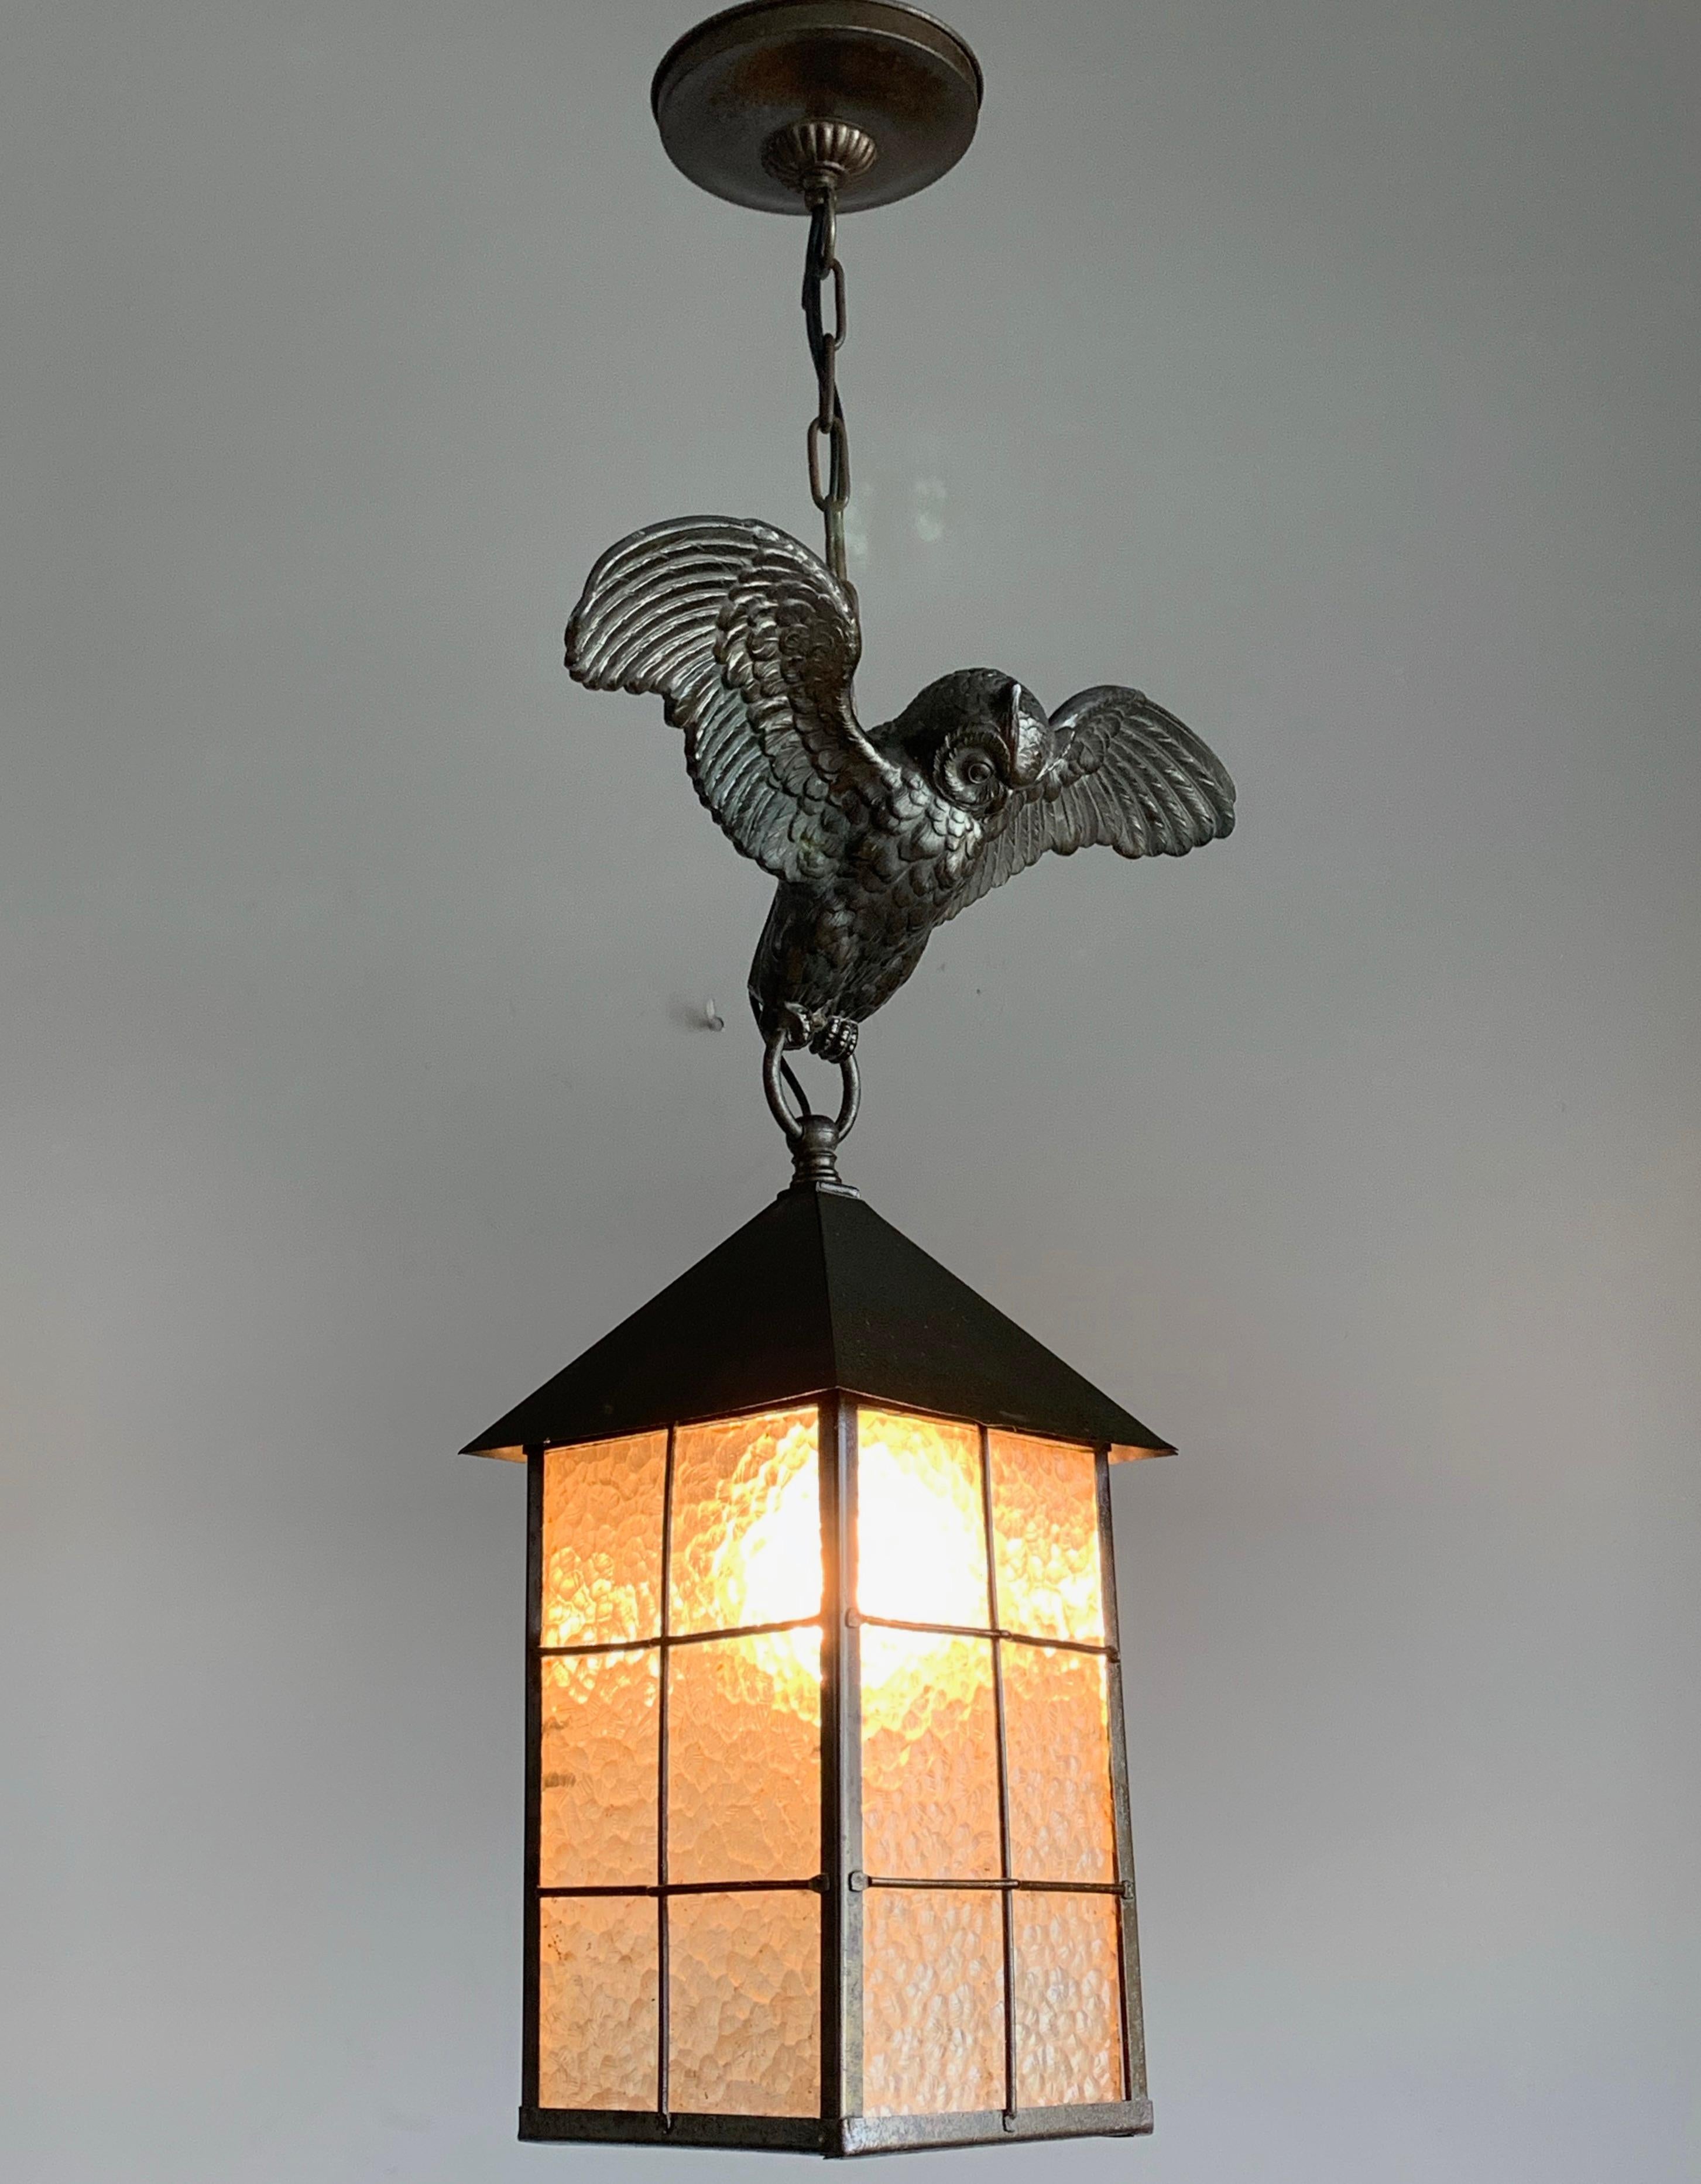 Rare and beautifully handcrafted owl holding a lantern.

This beautifully executed and sculptural light fixture will look great at home, but it can also create the perfect atmosphere in a library or other building where gaining knowledge, where